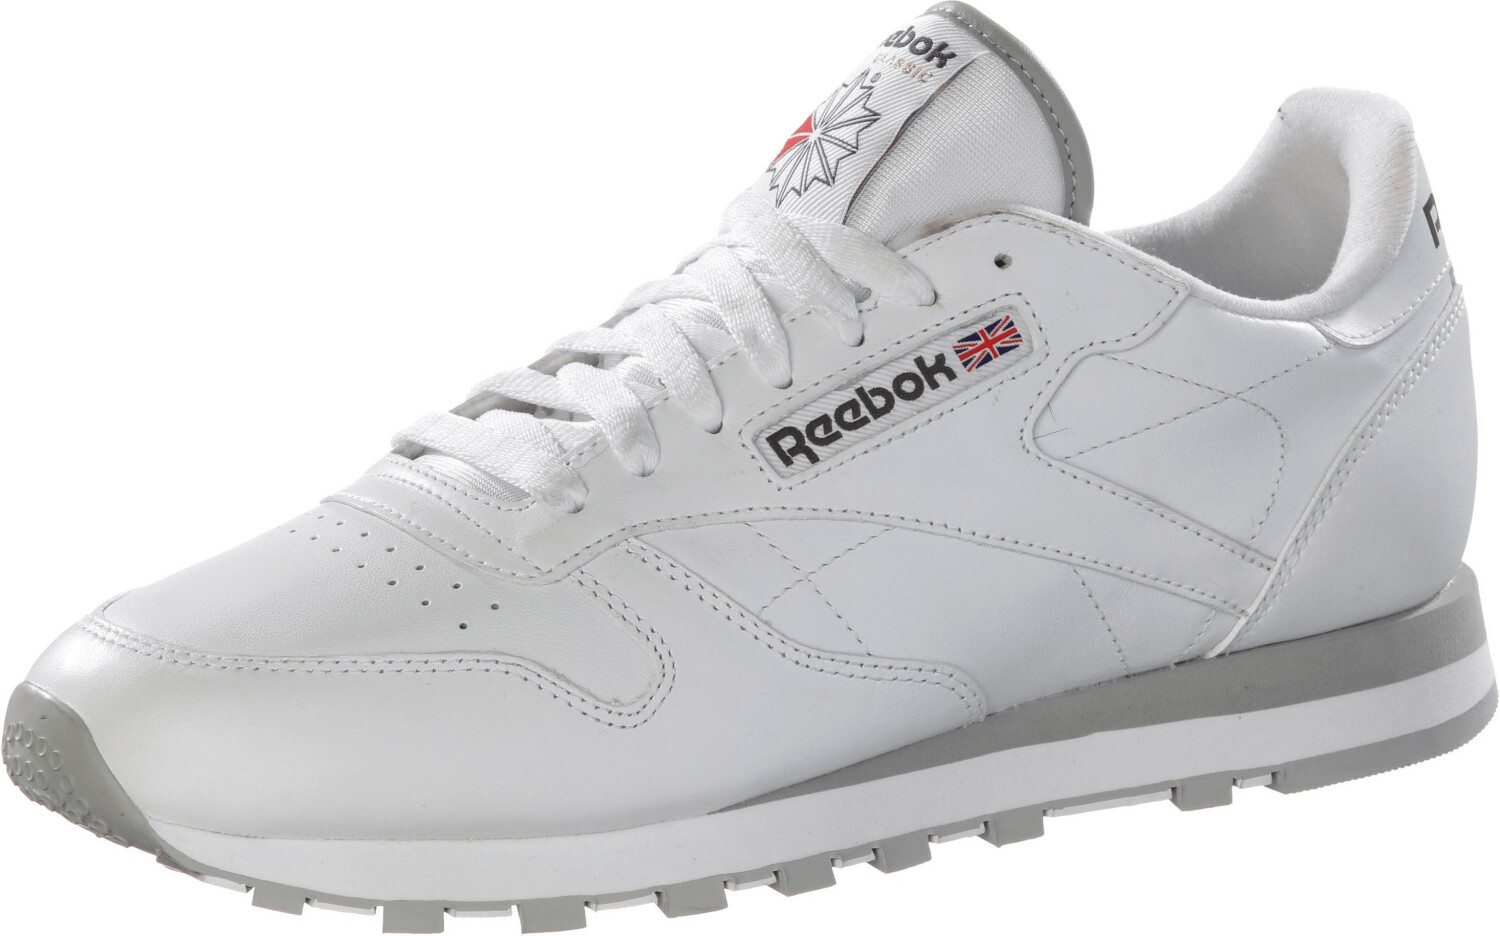 mens reebok classic trainers size 10